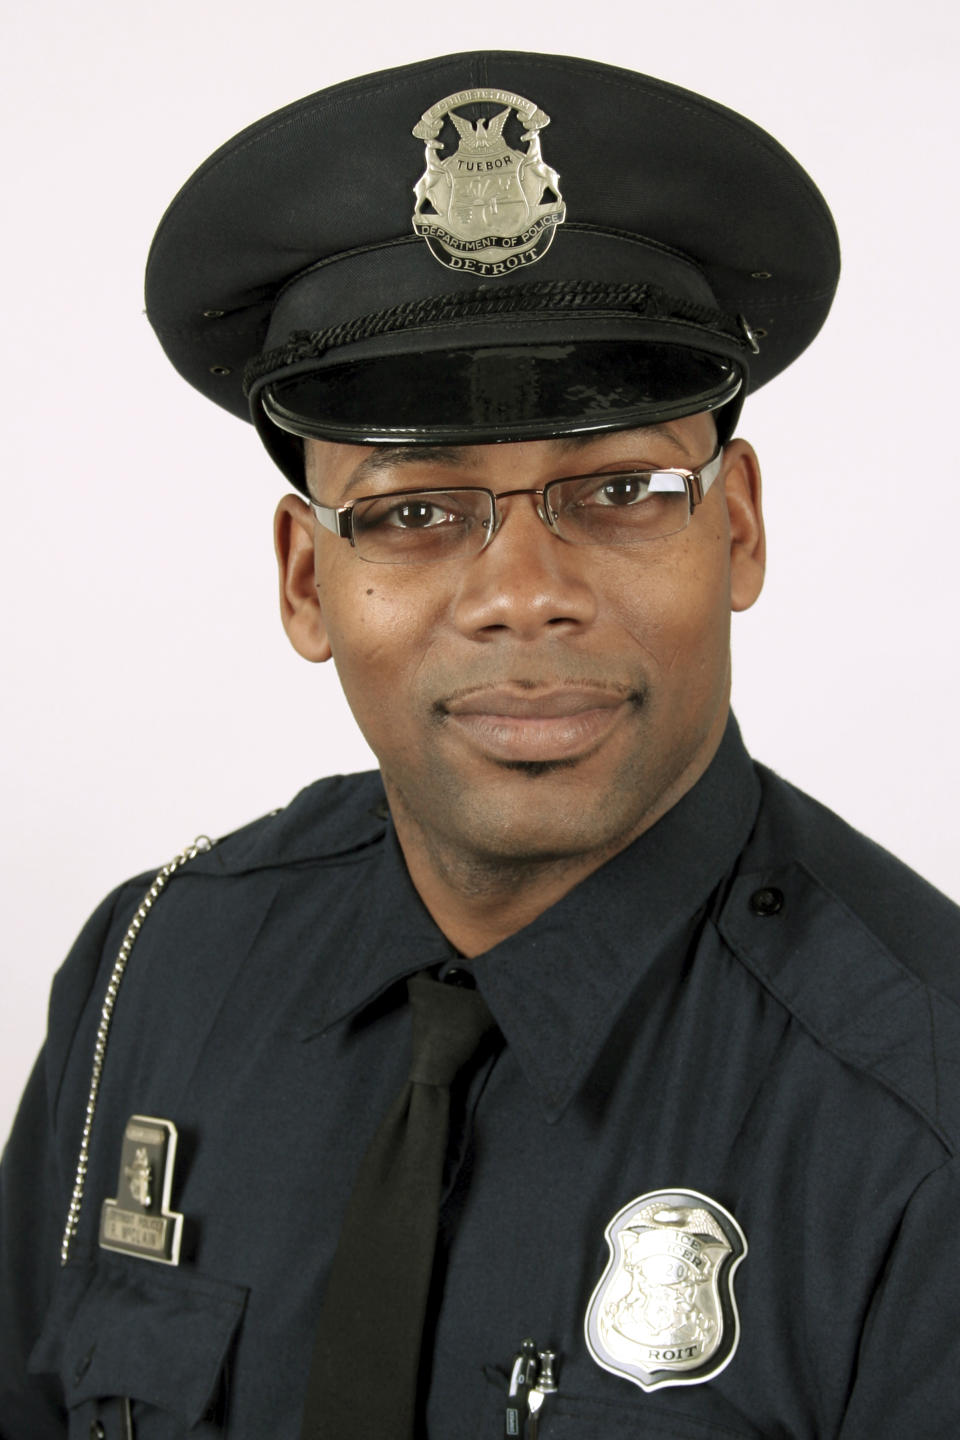 This undated photo provided by the Detroit Police Department shows Officer Rasheen McClain. A gunman who fatally shot Detroit officer McClain and wounded another was trying "to bait" them as they searched a home for him, police Chief James Craig said Thursday, Nov. 21, 2019. McClain was shot in the neck. His partner, officer Phillippe Batoum-Bisse, was shot in the leg. "He was a leader, very tactical, very much about doing a great job," Craig said about McClain. (Detroit Police Department via AP)